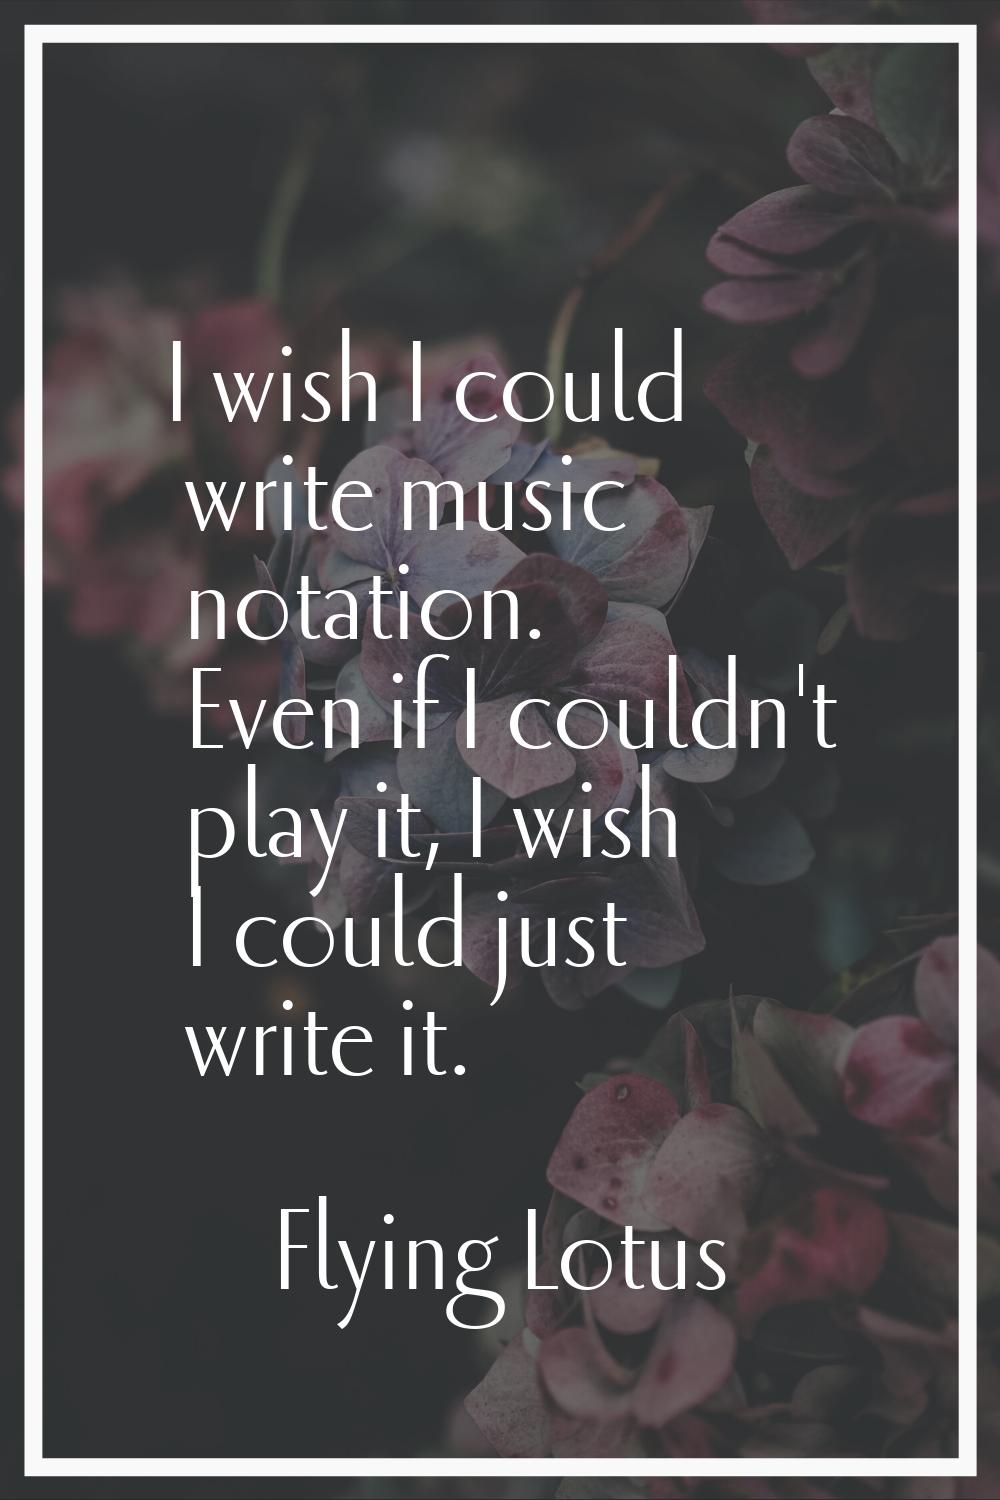 I wish I could write music notation. Even if I couldn't play it, I wish I could just write it.